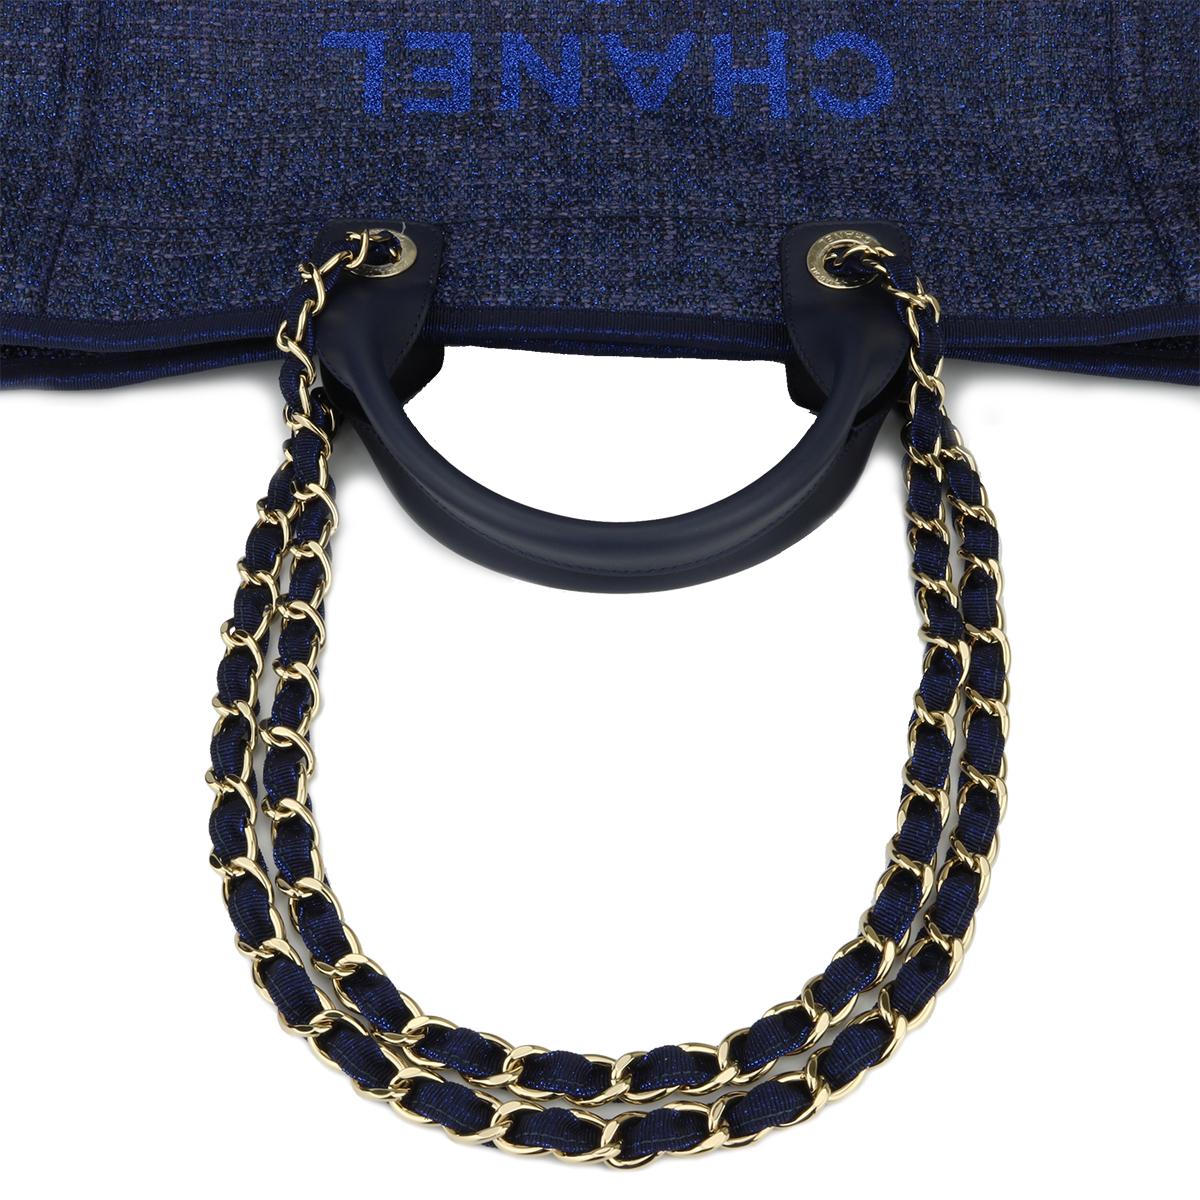 chanel deauville tote navy blue